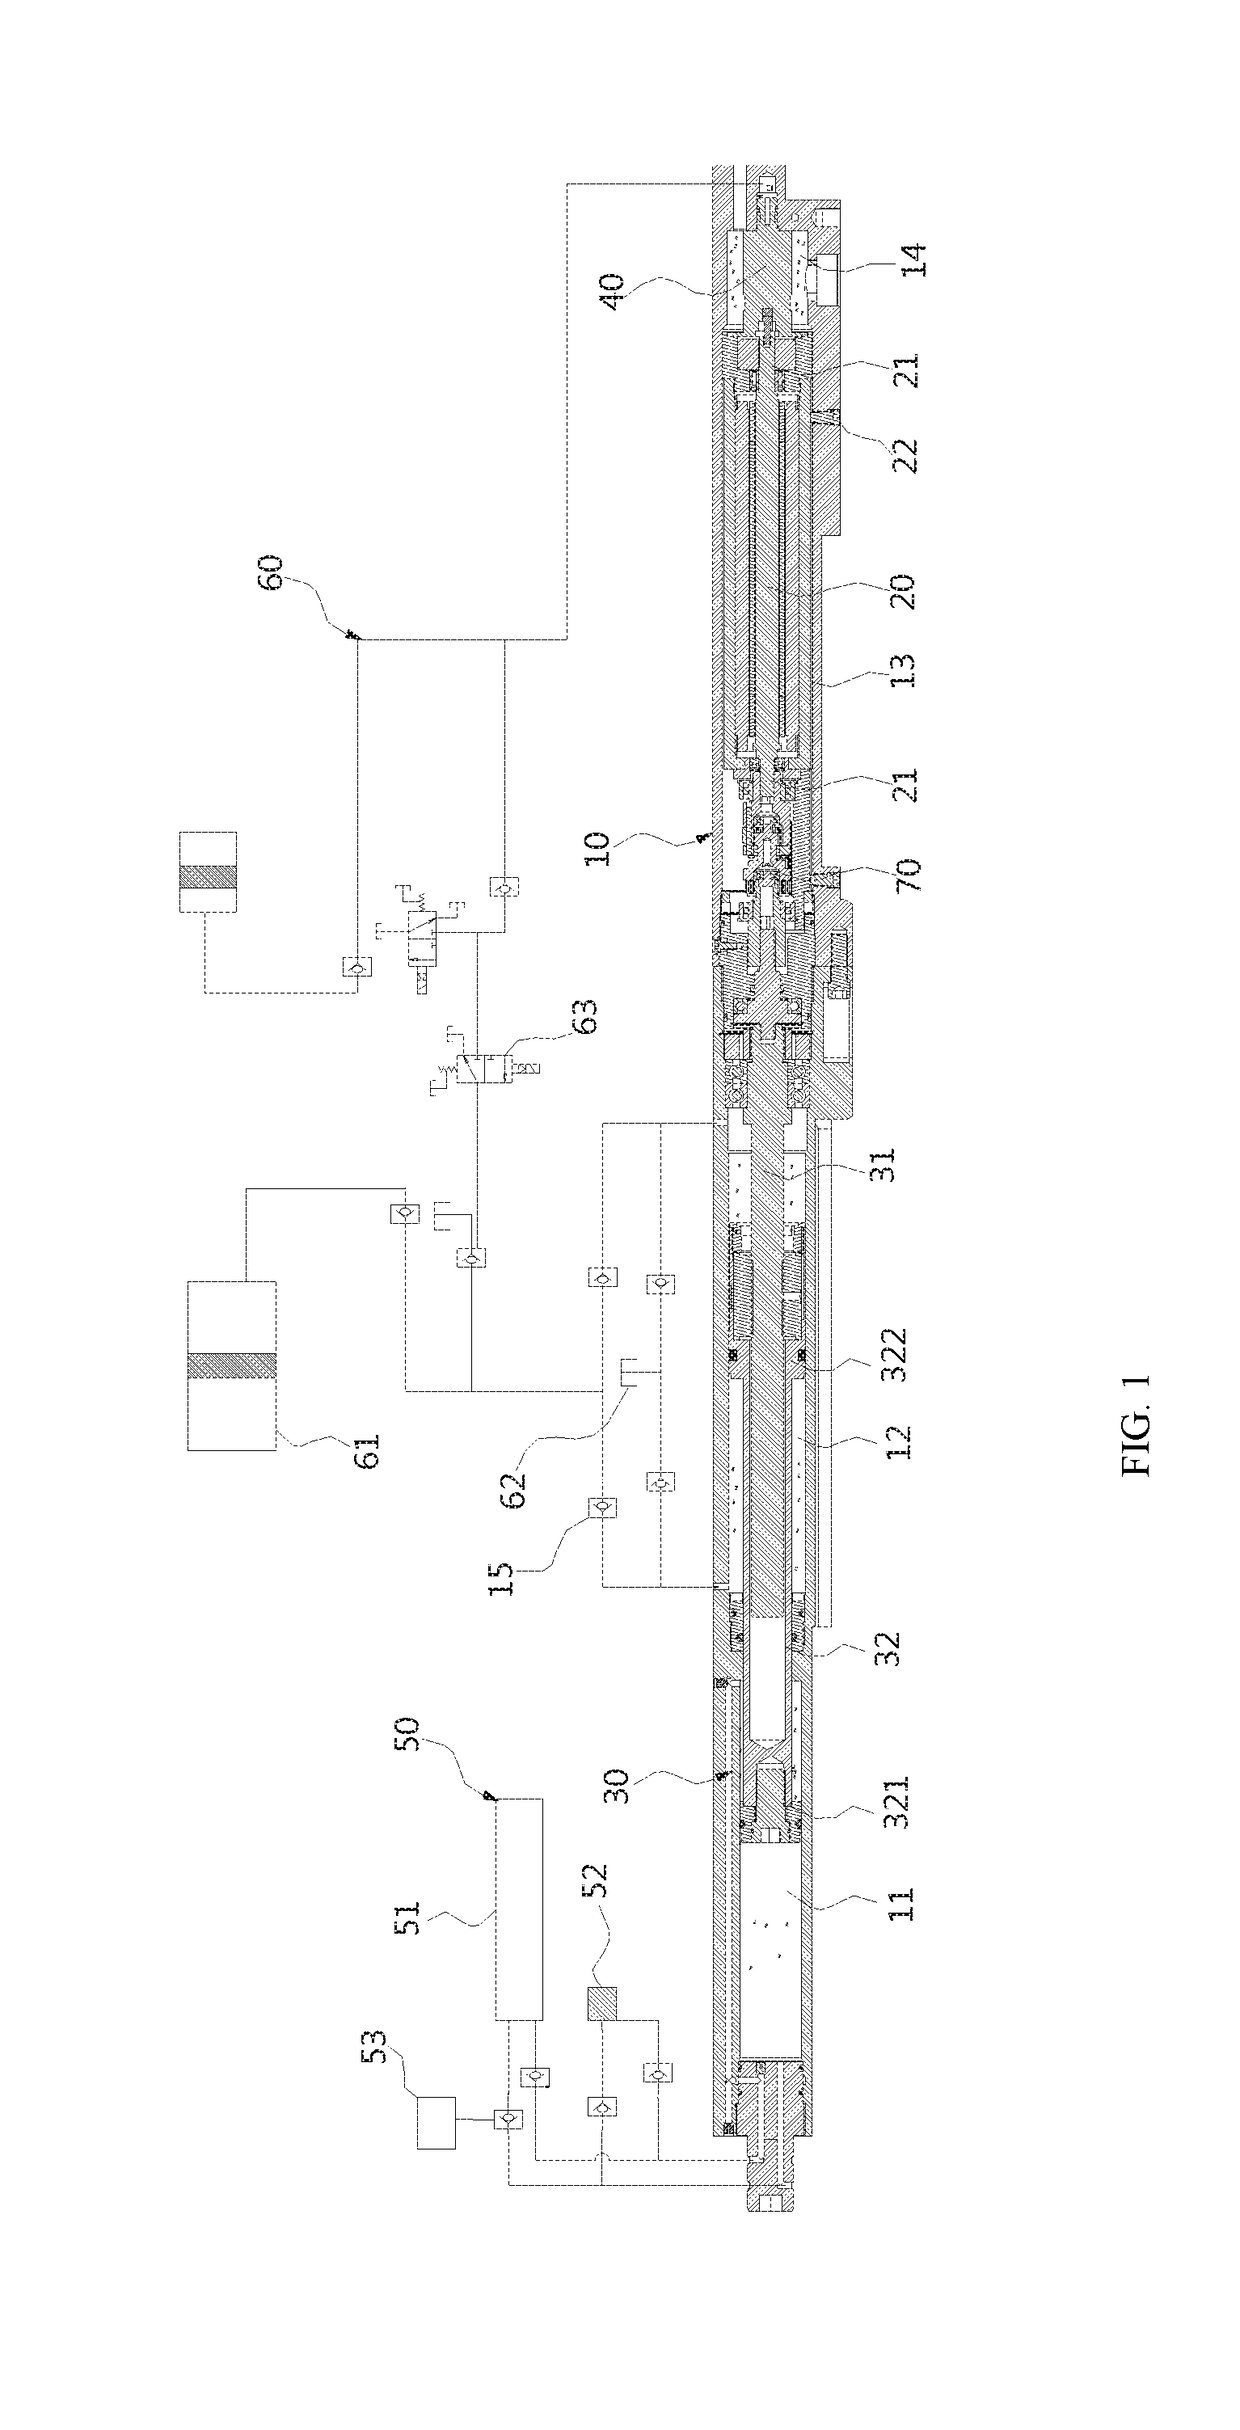 Integrated apparatus for precisely and synchronously controlling amounts of discharged hydraulic oil and fluid using motor